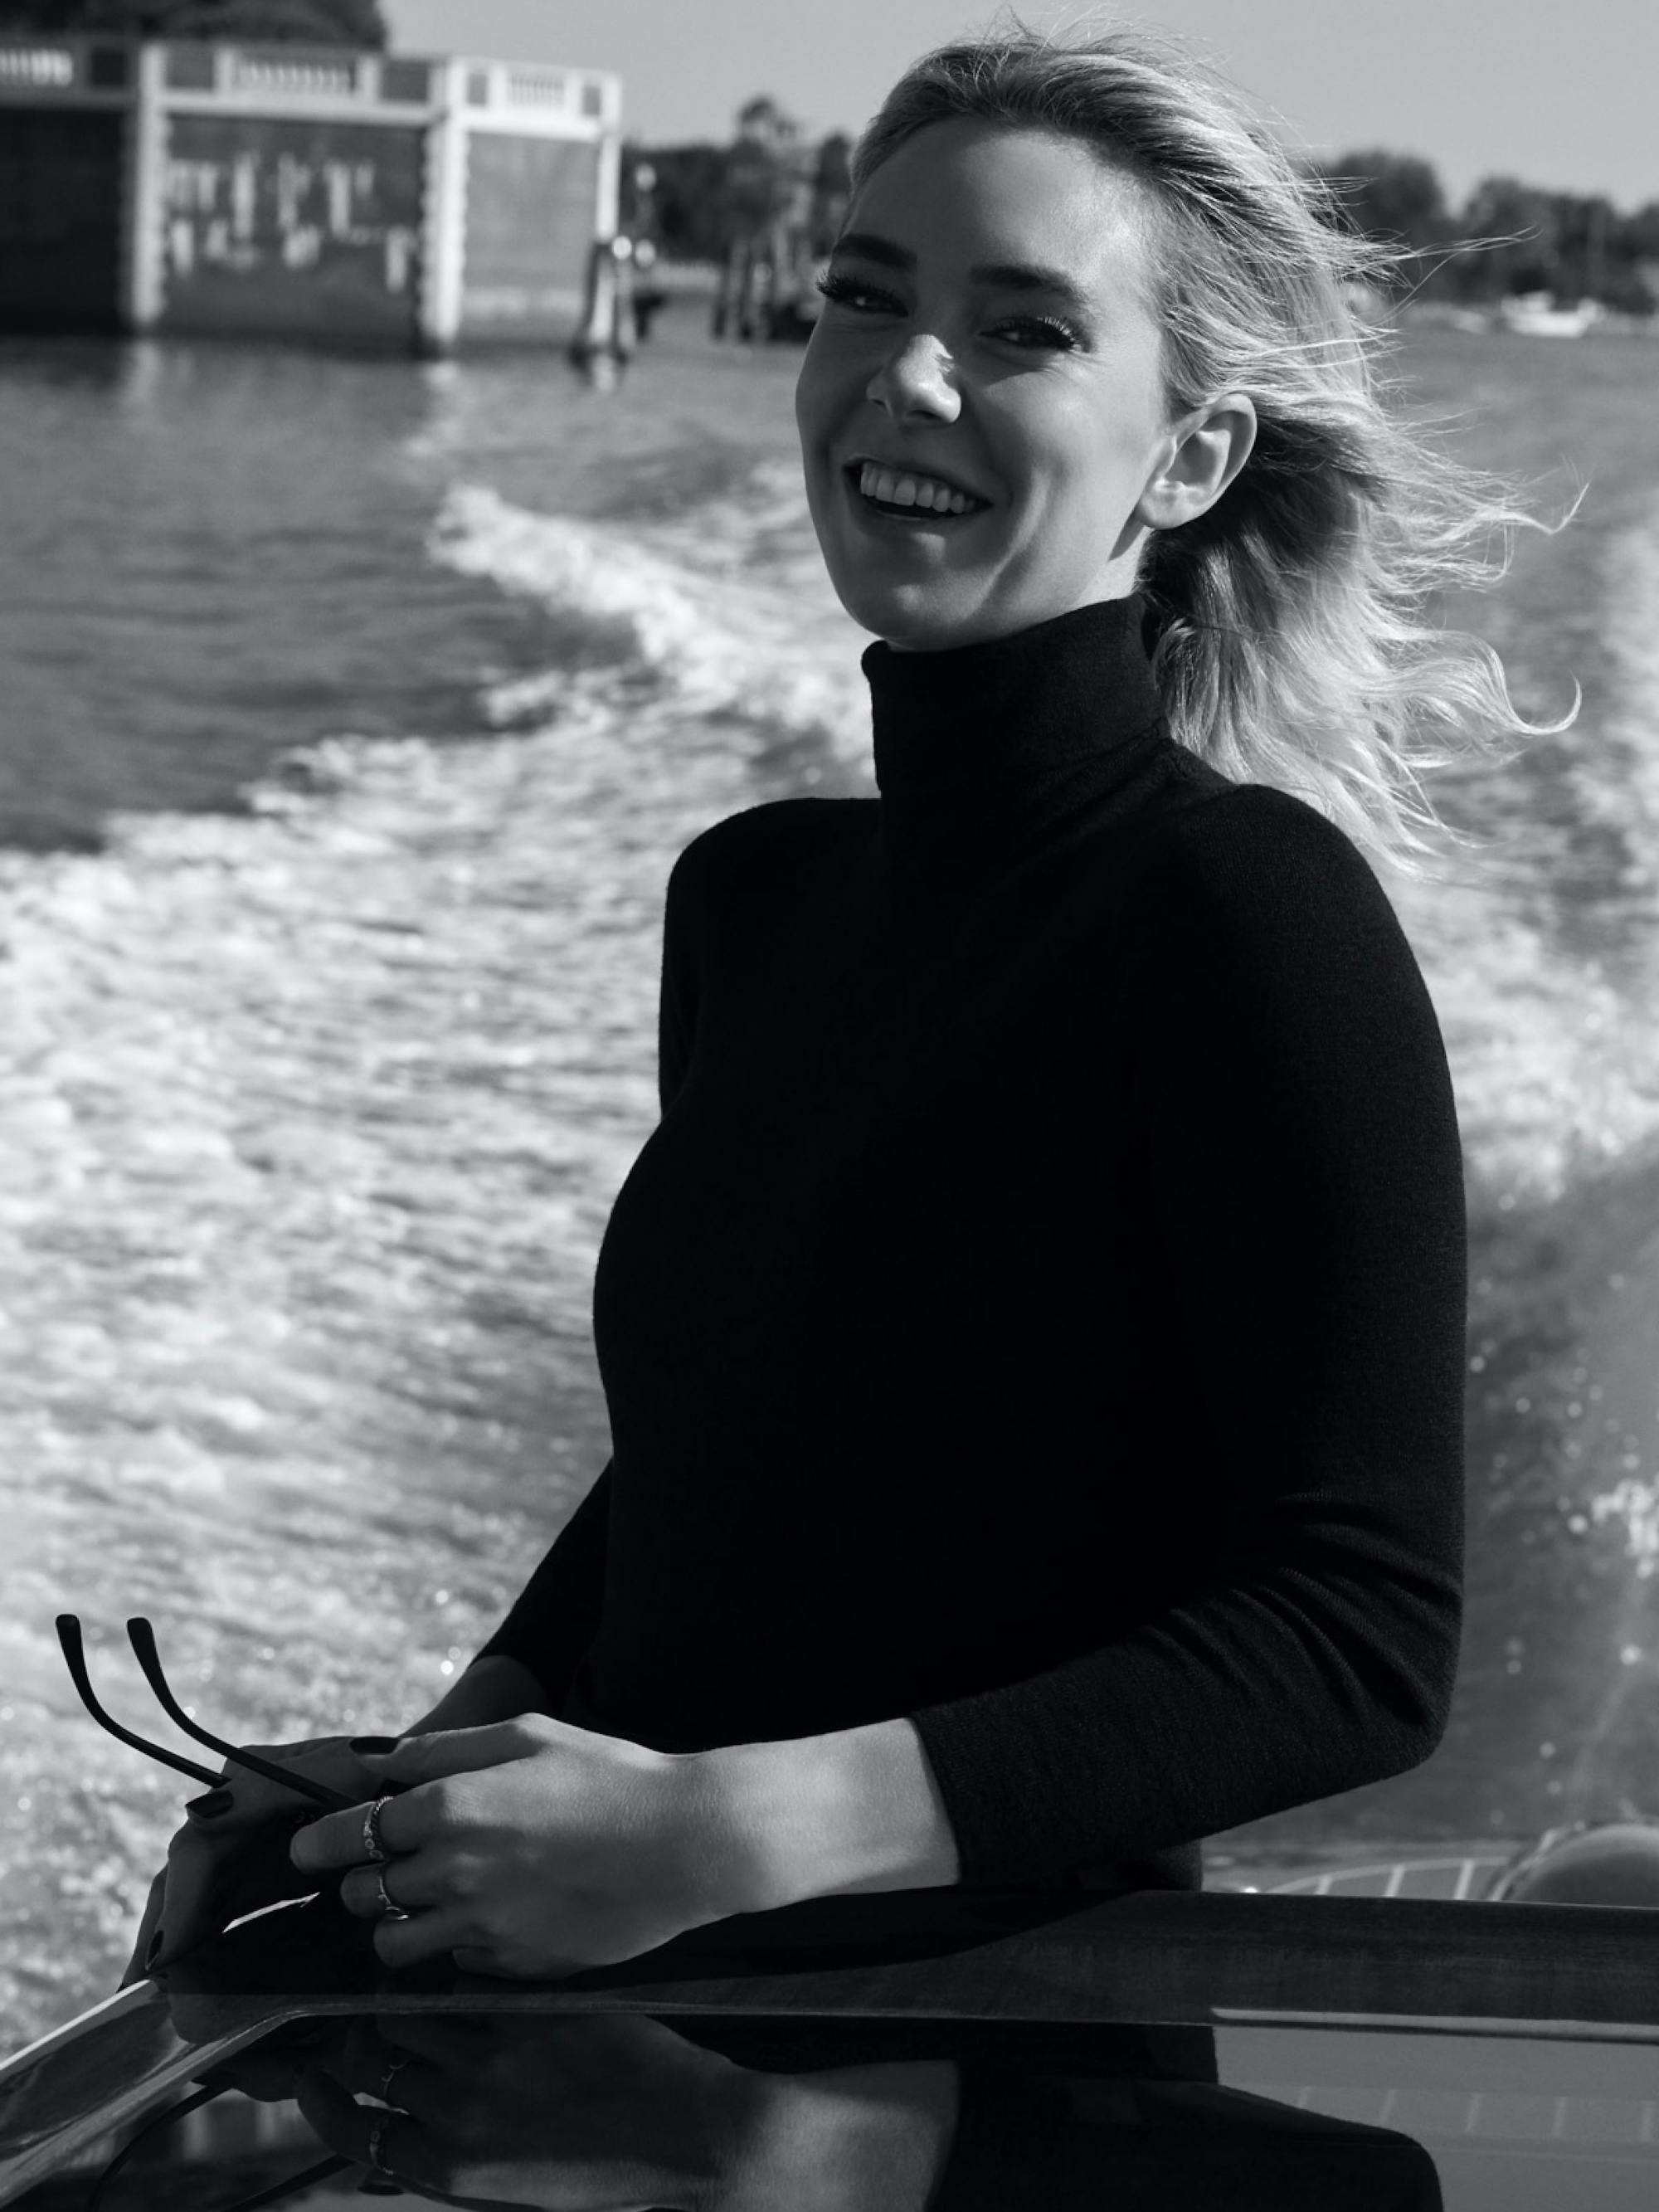 Vanessa Kirby smiles as she stands on a boat, her hair blowing in the wind.